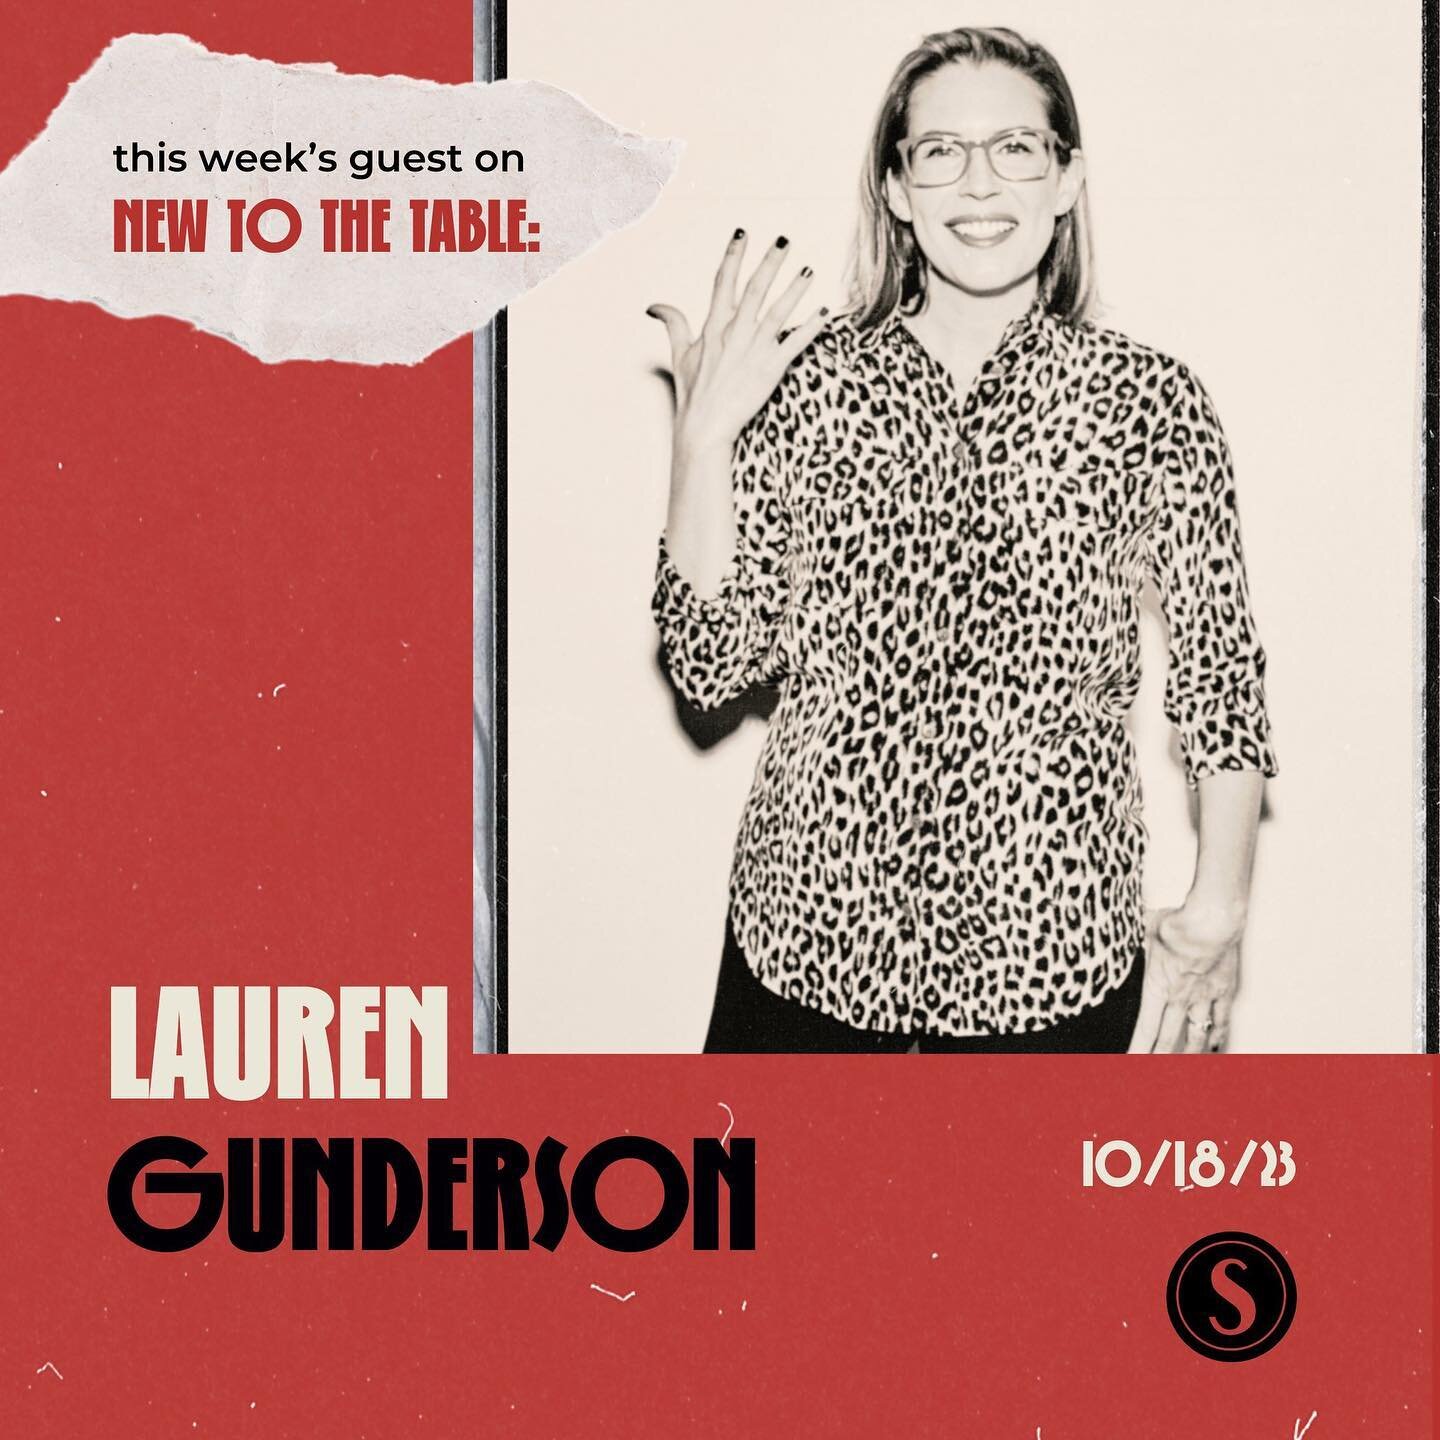 we promised a double drop this week, and deliver, we did 🫡 

we&rsquo;ve got the one and only LAUREN GUNDERSON on New To The Table. Lauren is a playwright whose work meets at the intersection of women, science, and history. Lauren is also one of the